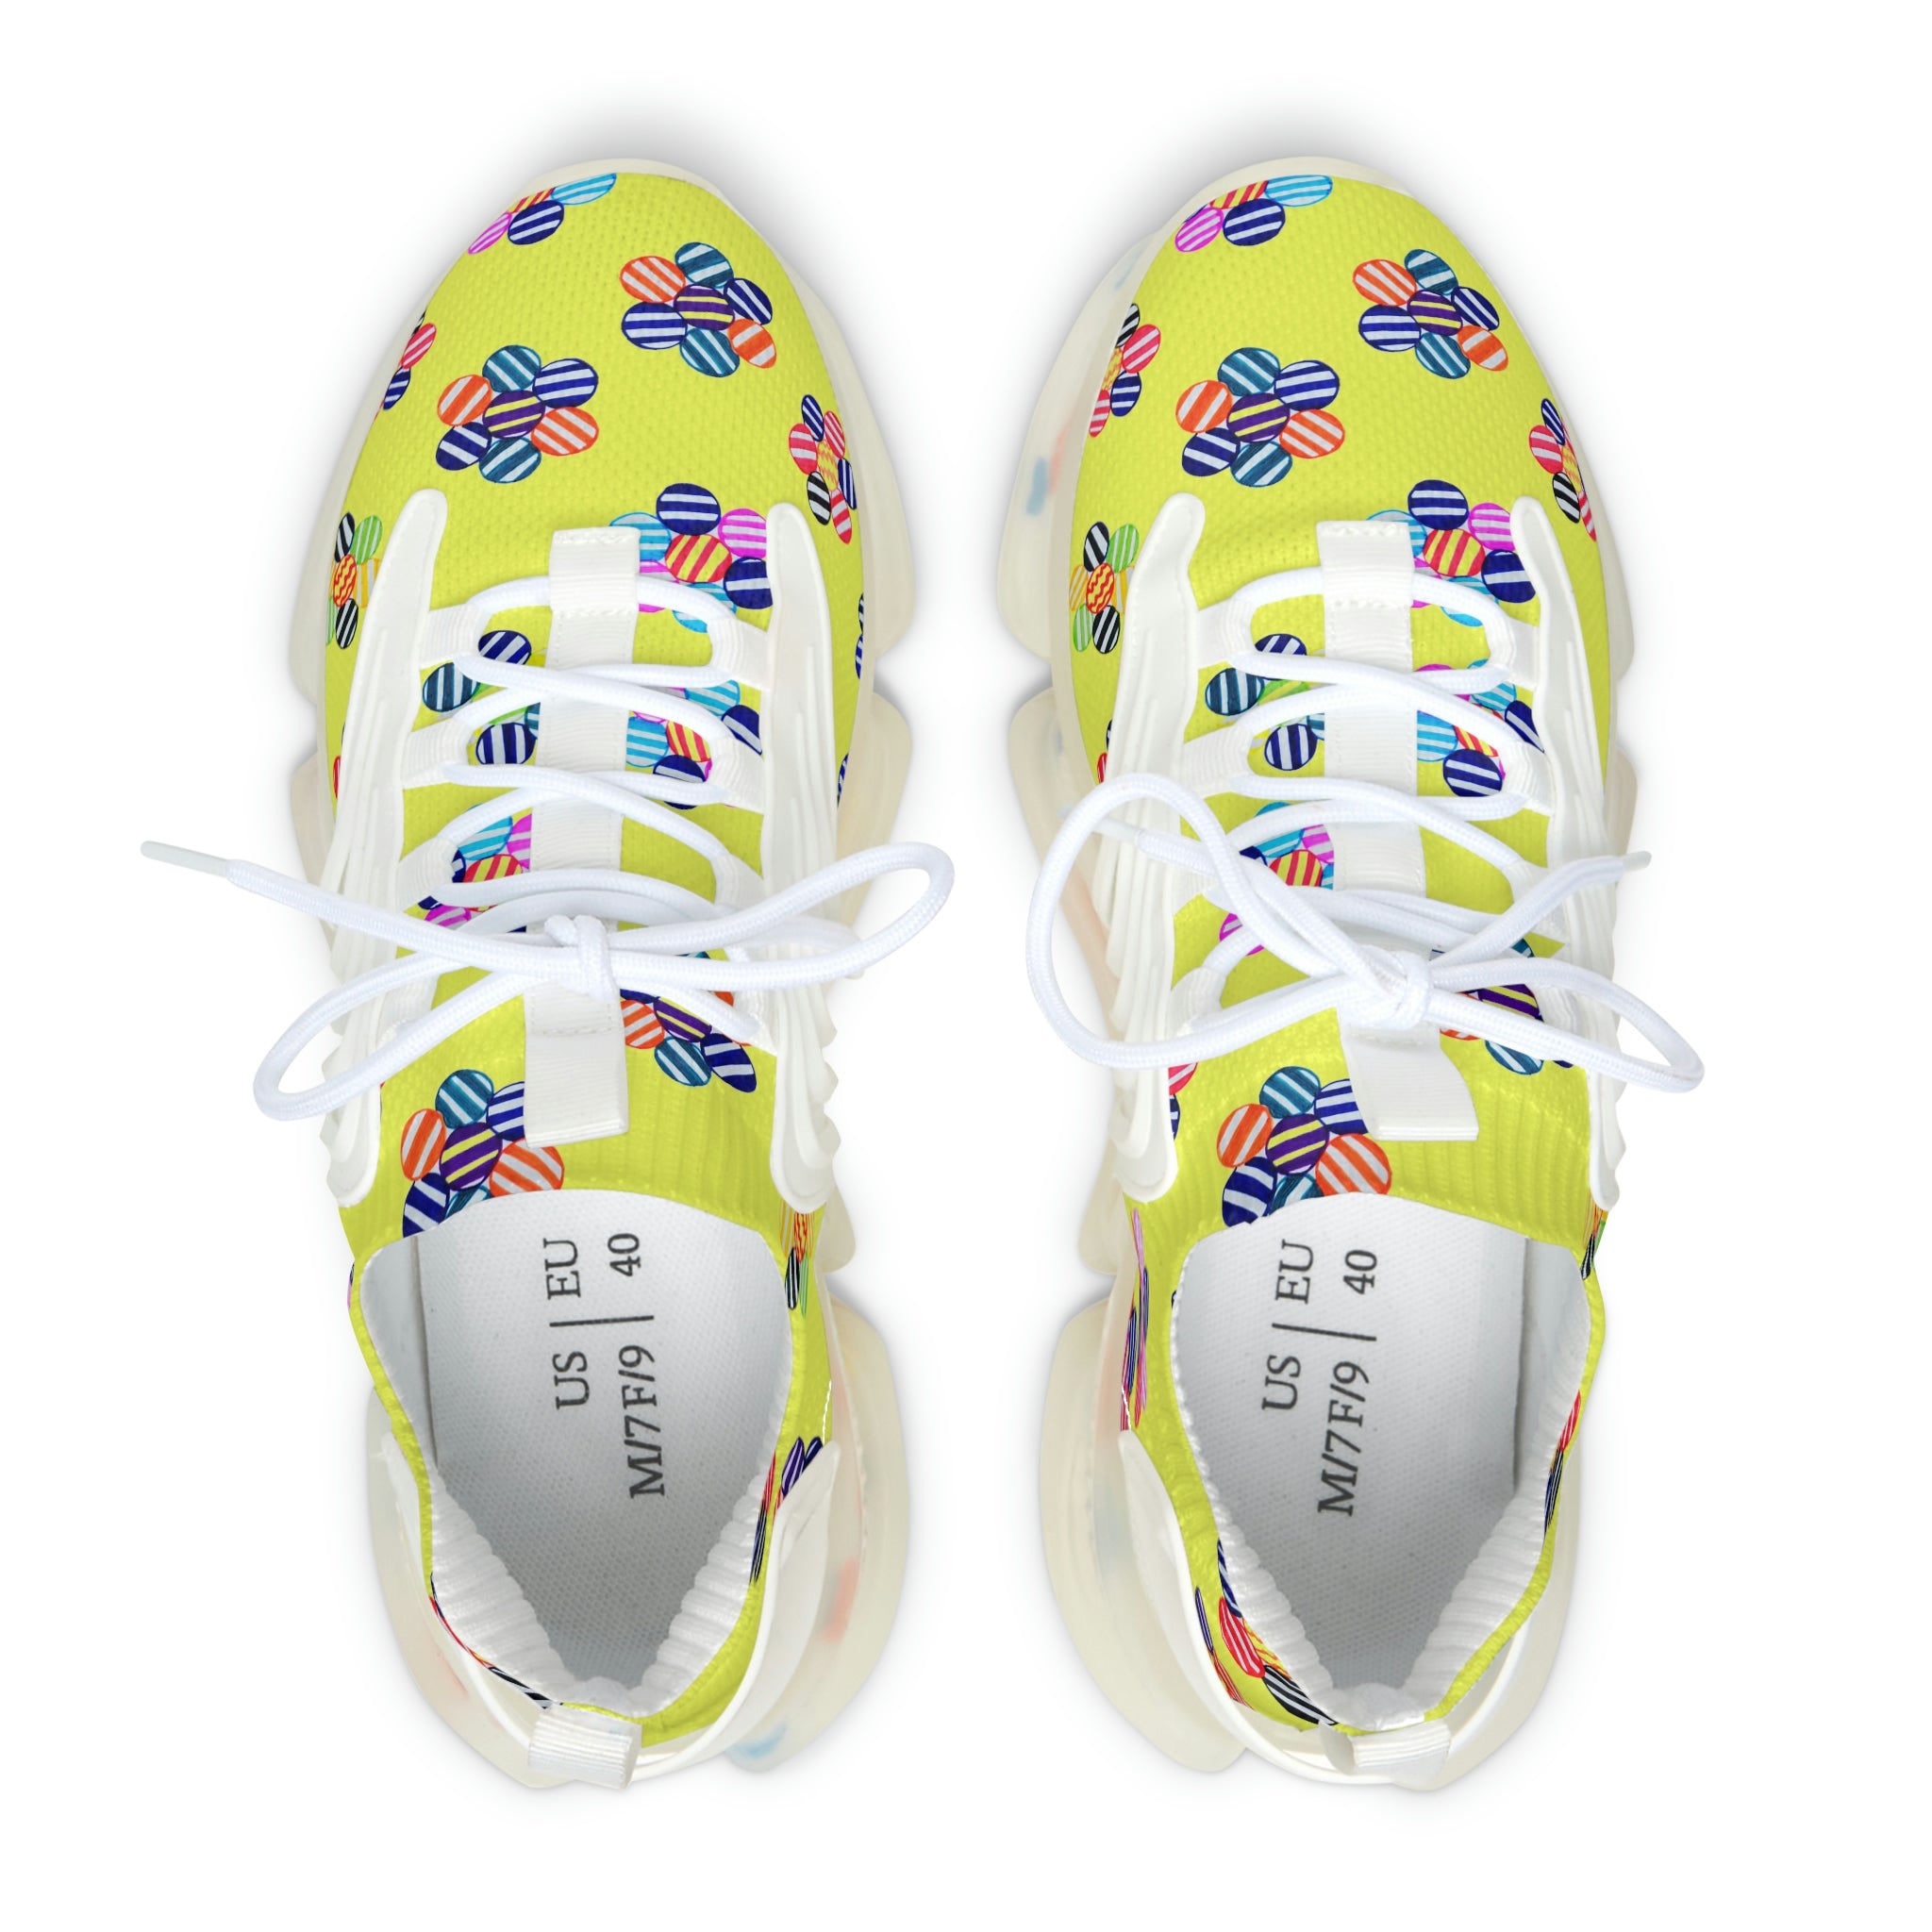 Canary Candy Floral Printed OTT Women's Mesh Knit Sneakers